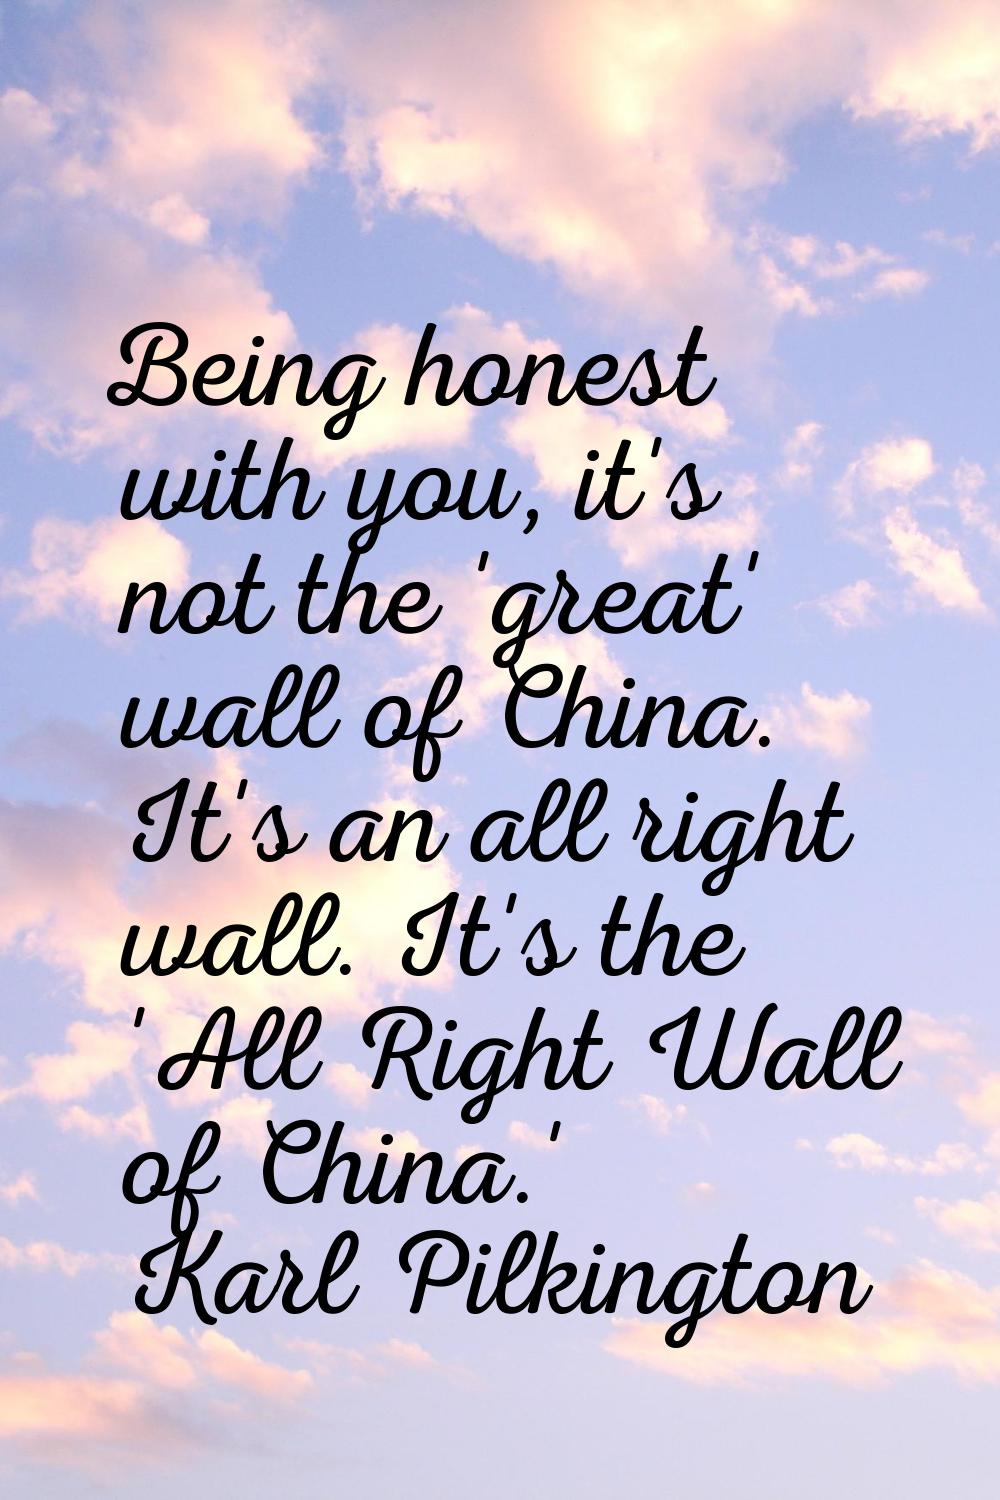 Being honest with you, it's not the 'great' wall of China. It's an all right wall. It's the 'All Ri